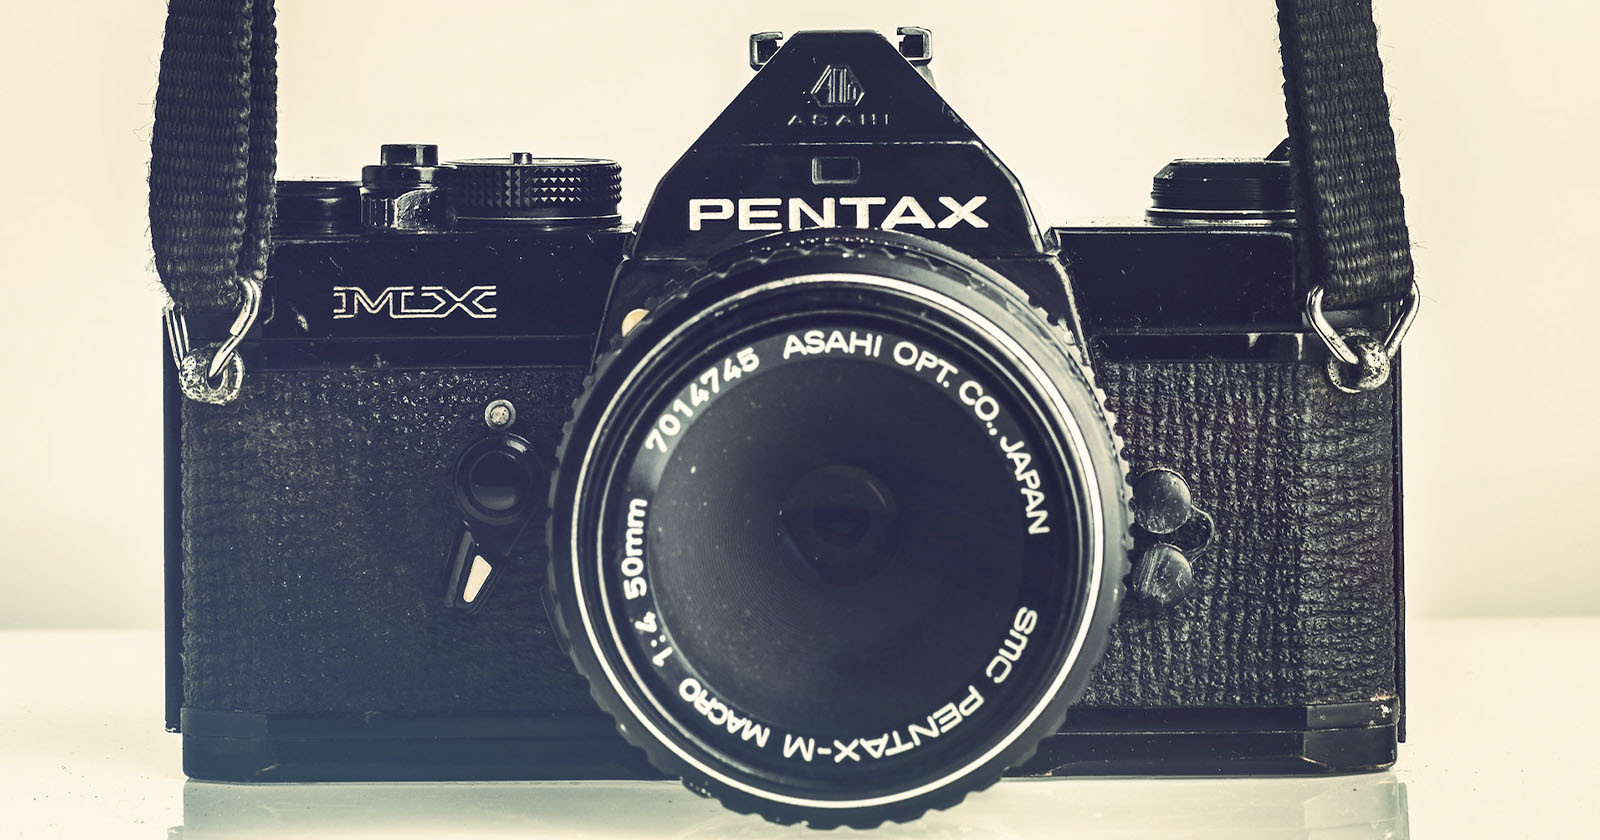 Pentax Launches New 35mm Camera Project After Film Resurgence